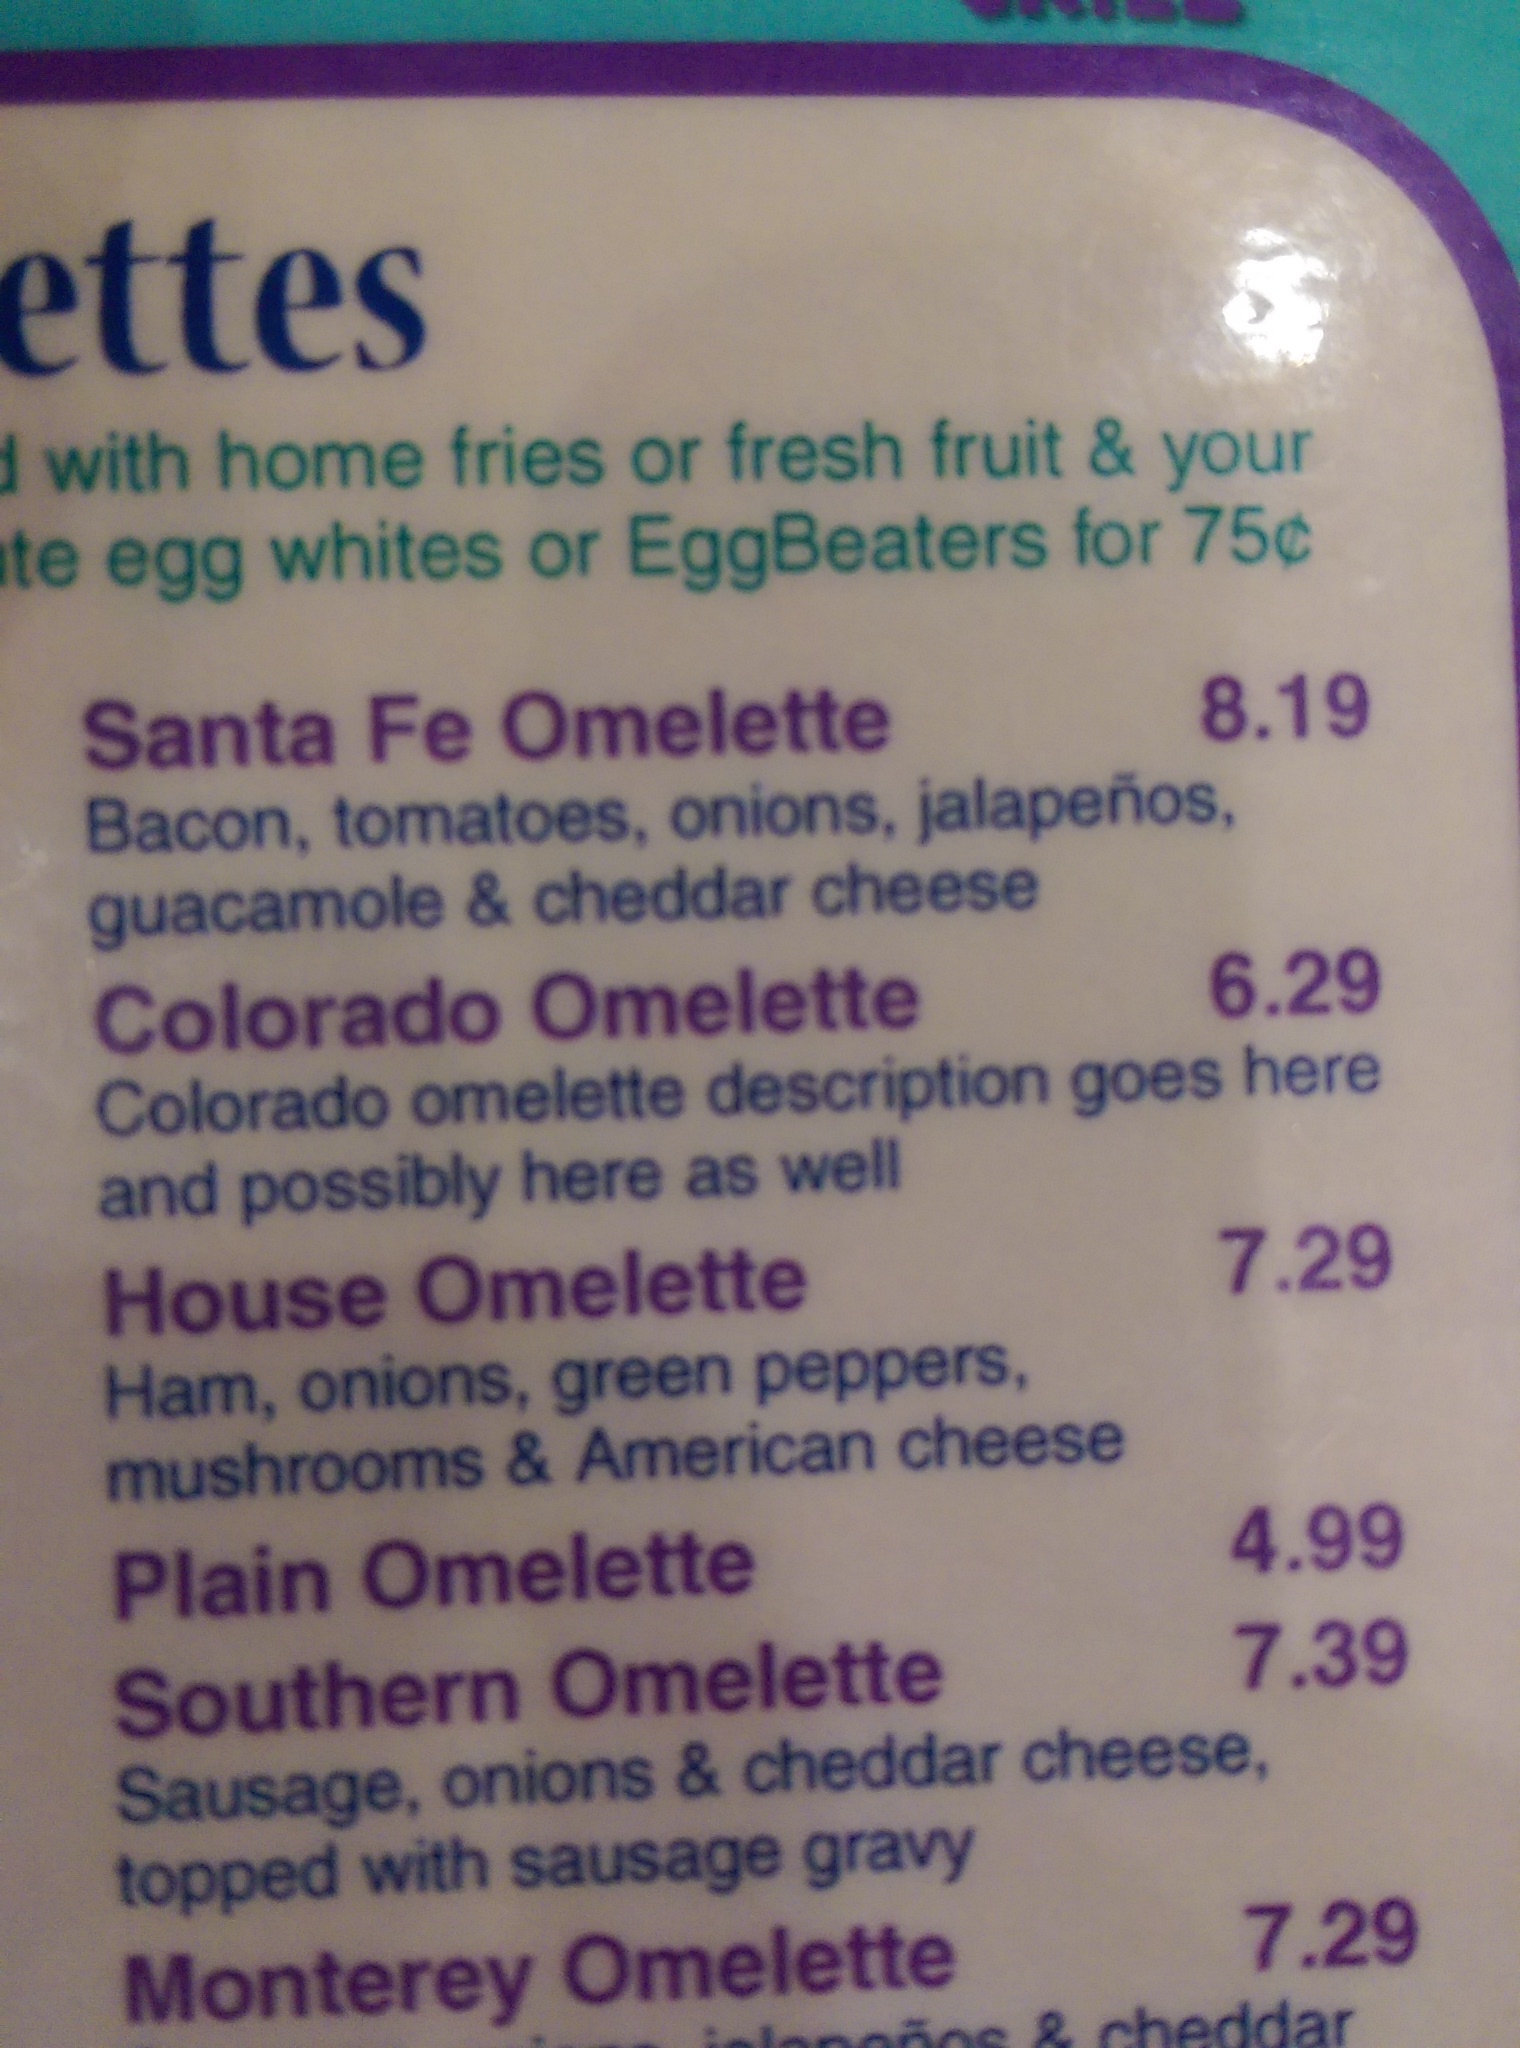 Colorado Omelette...mmm I'll have that.